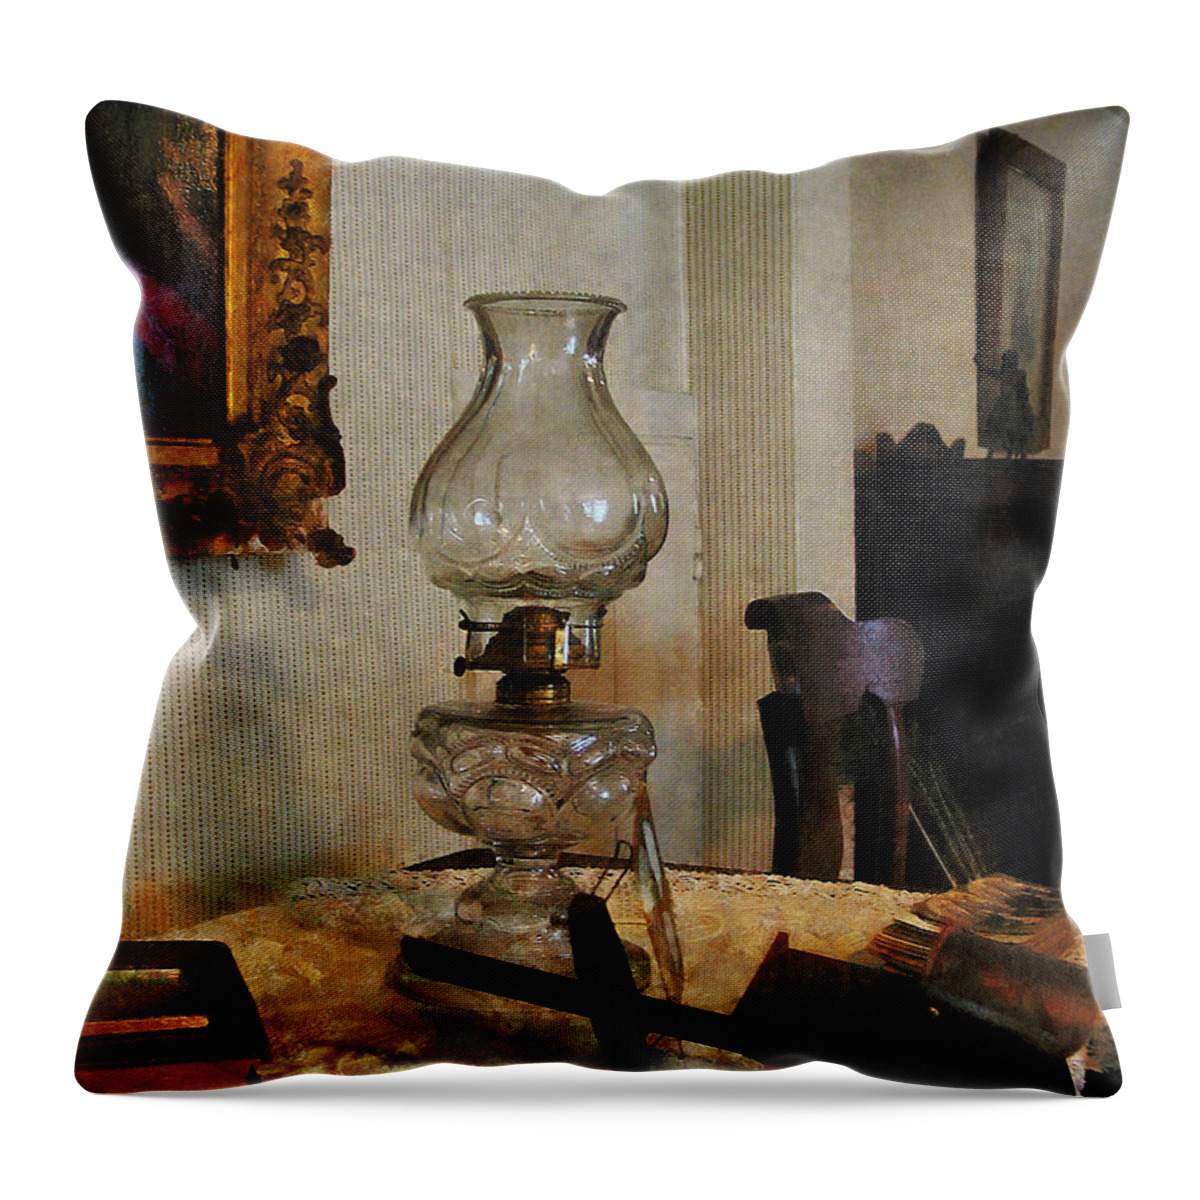 Lamp Throw Pillow featuring the photograph Glass Lamp and Stereopticon by Susan Savad